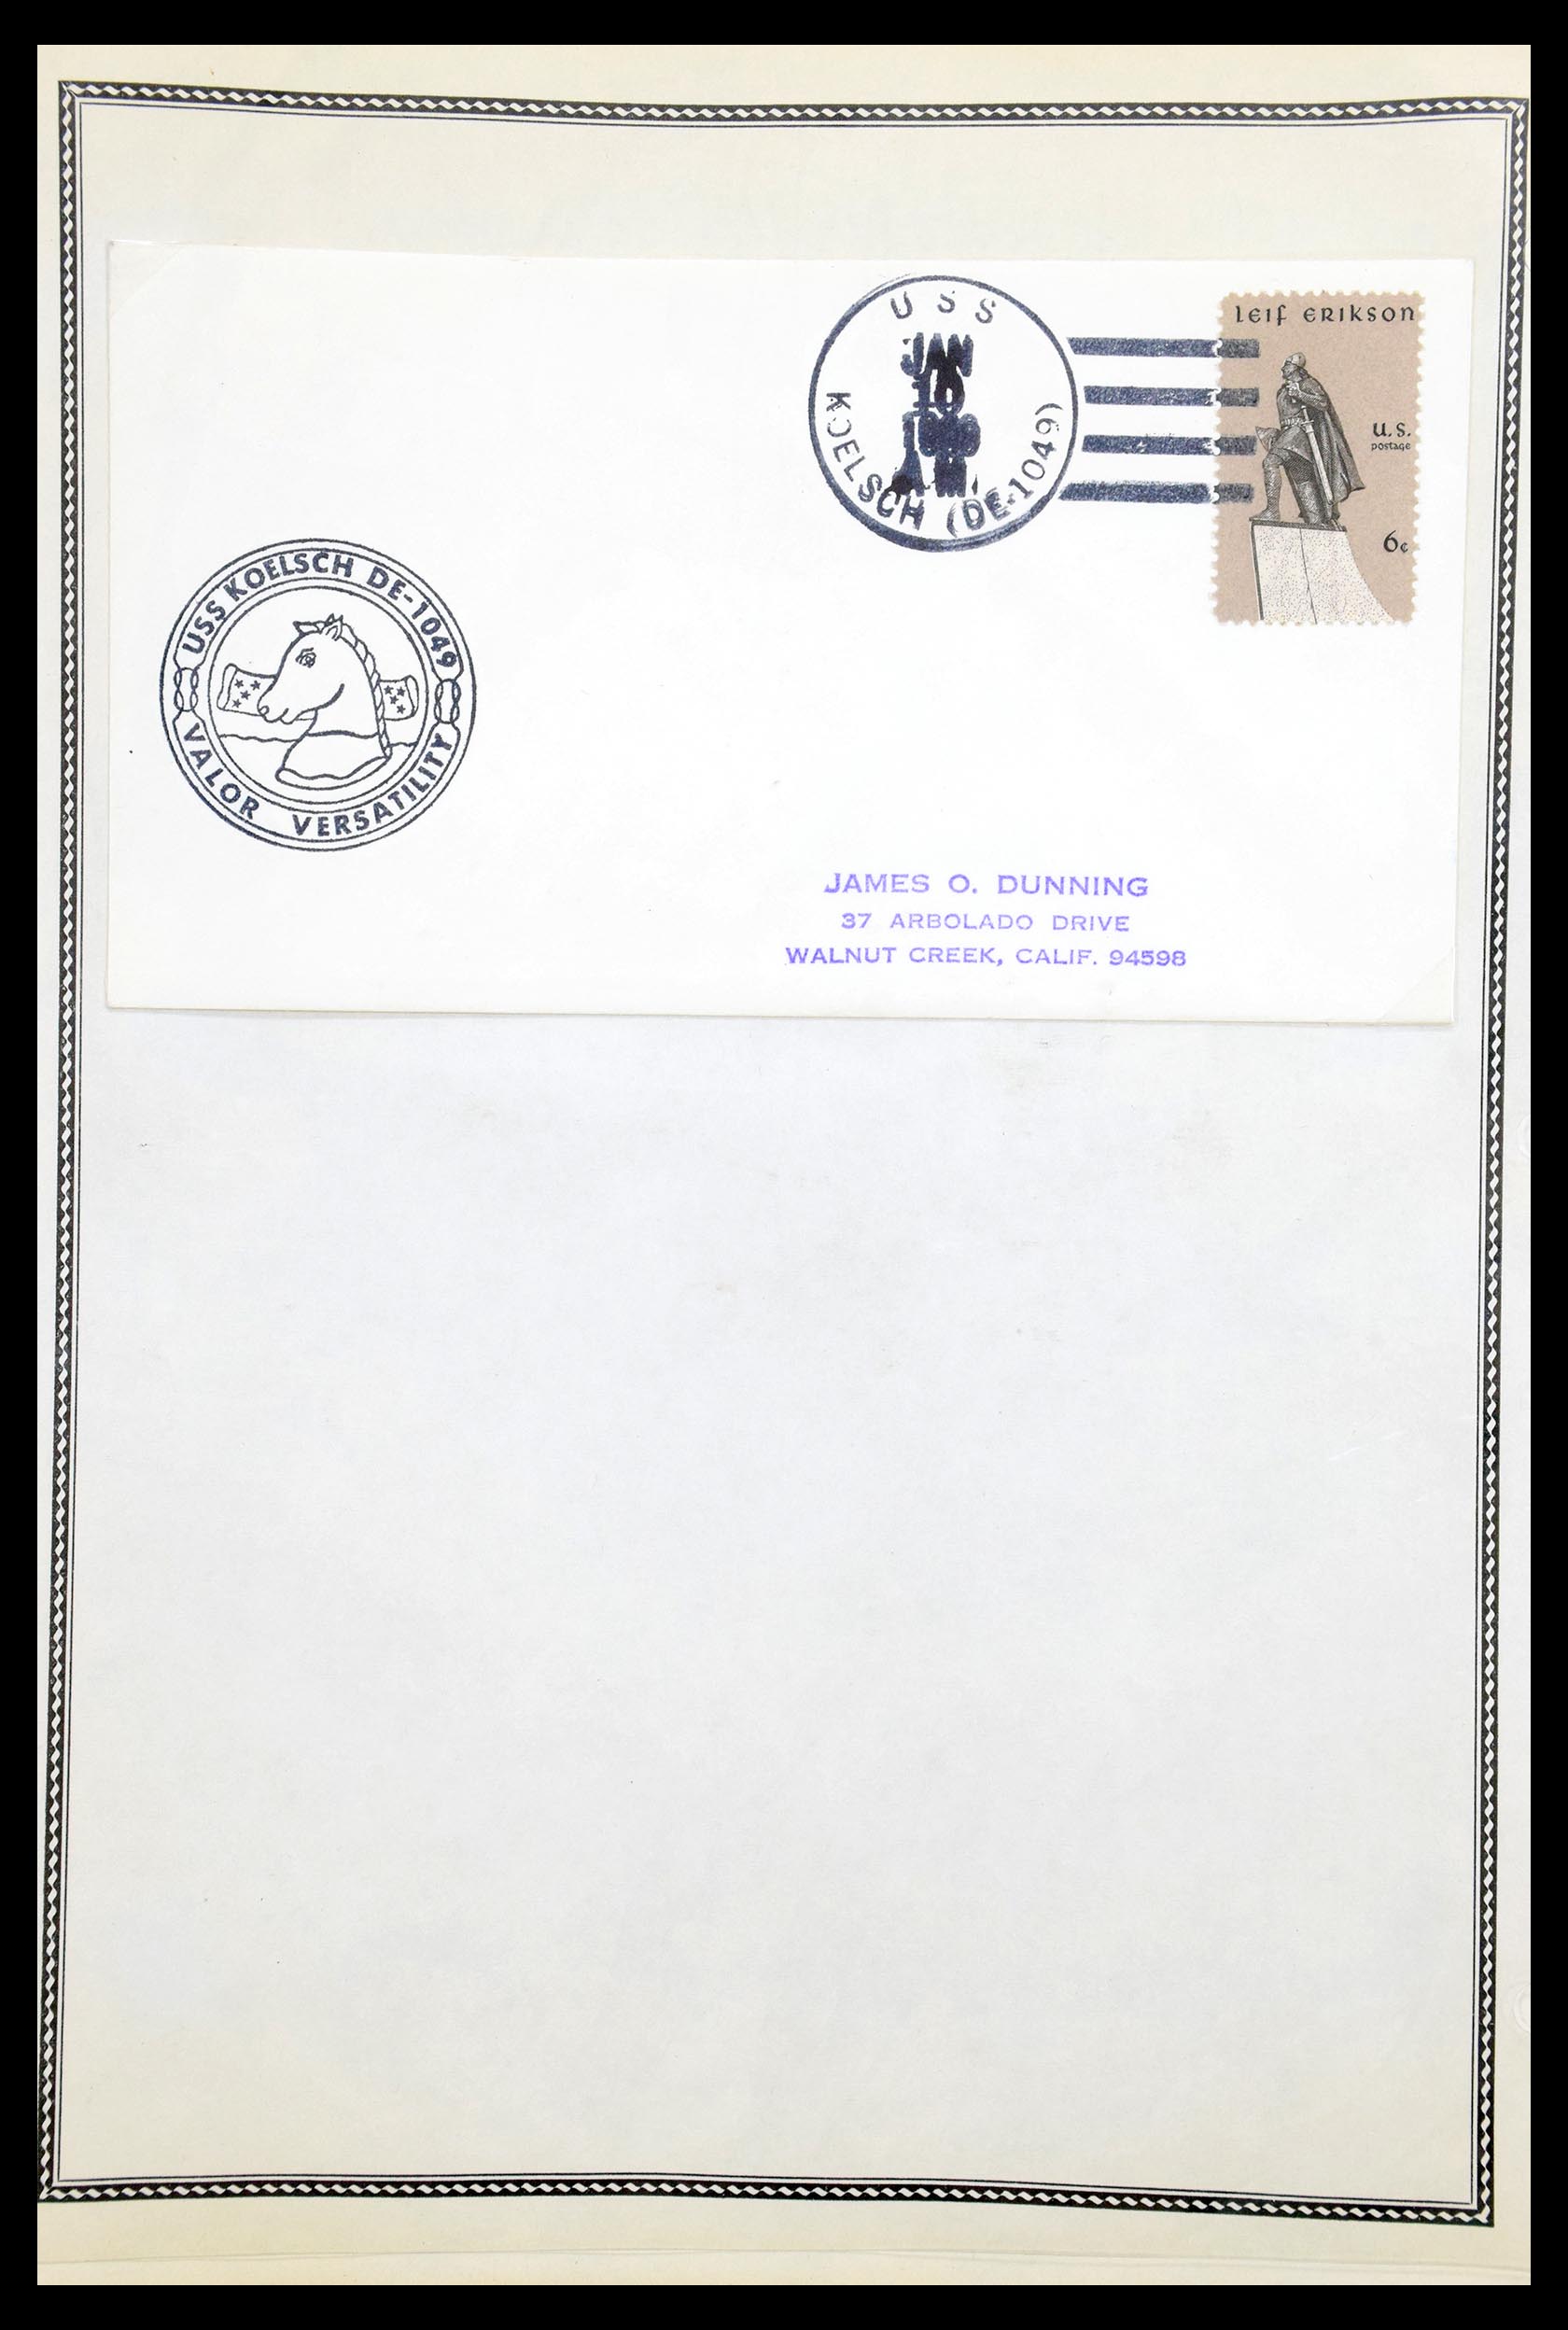 30341 082 - 30341 USA naval cover collection 1930-1970.